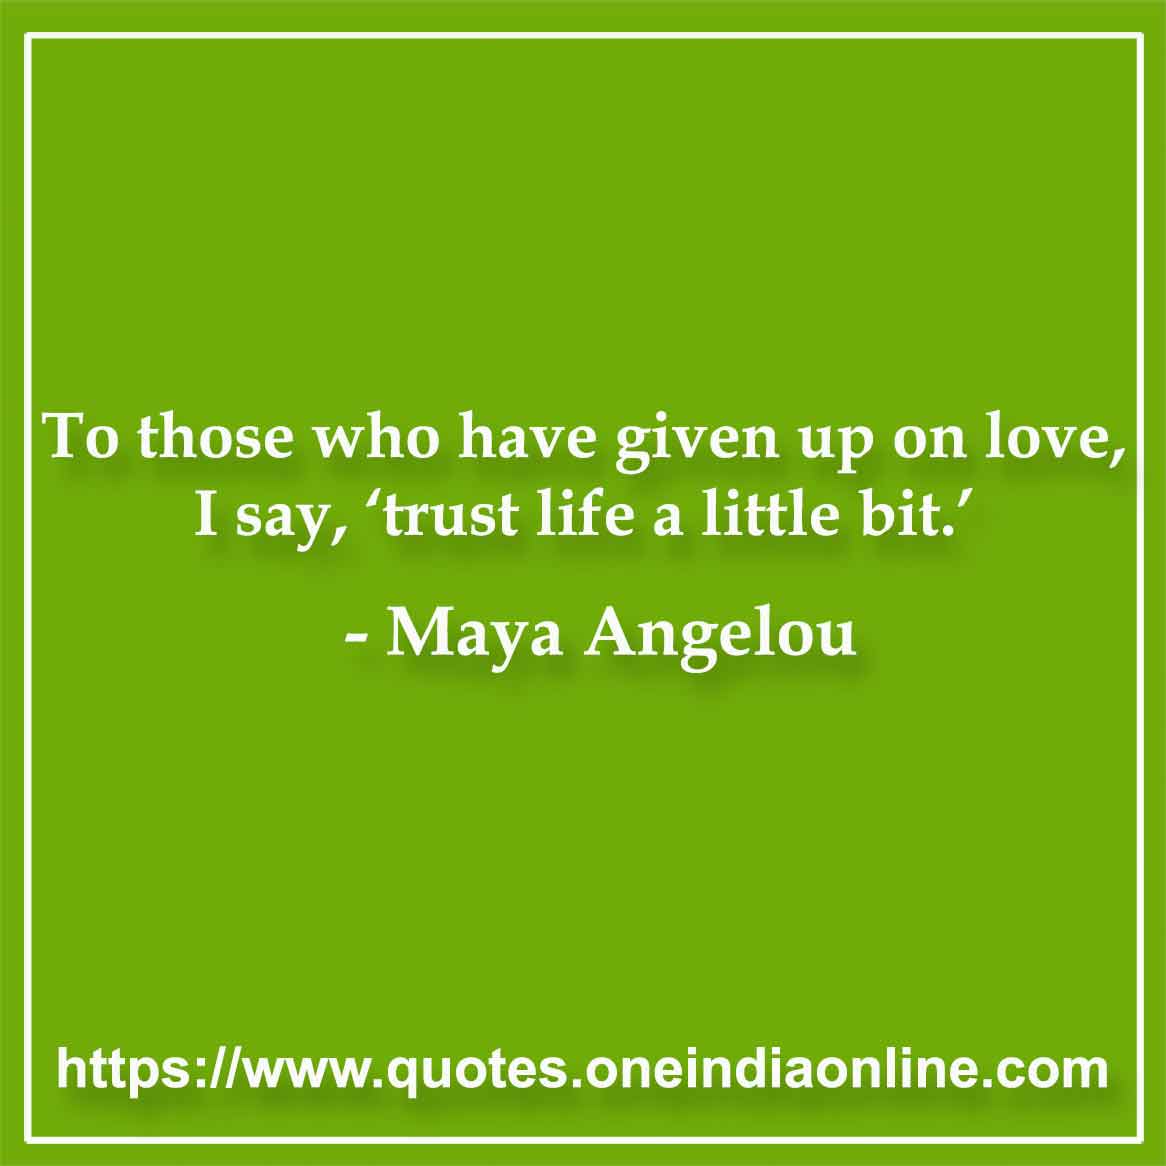 To those who have given up on love, I say, ‘trust life a little bit.’

- Quotations in English by Maya Angelou